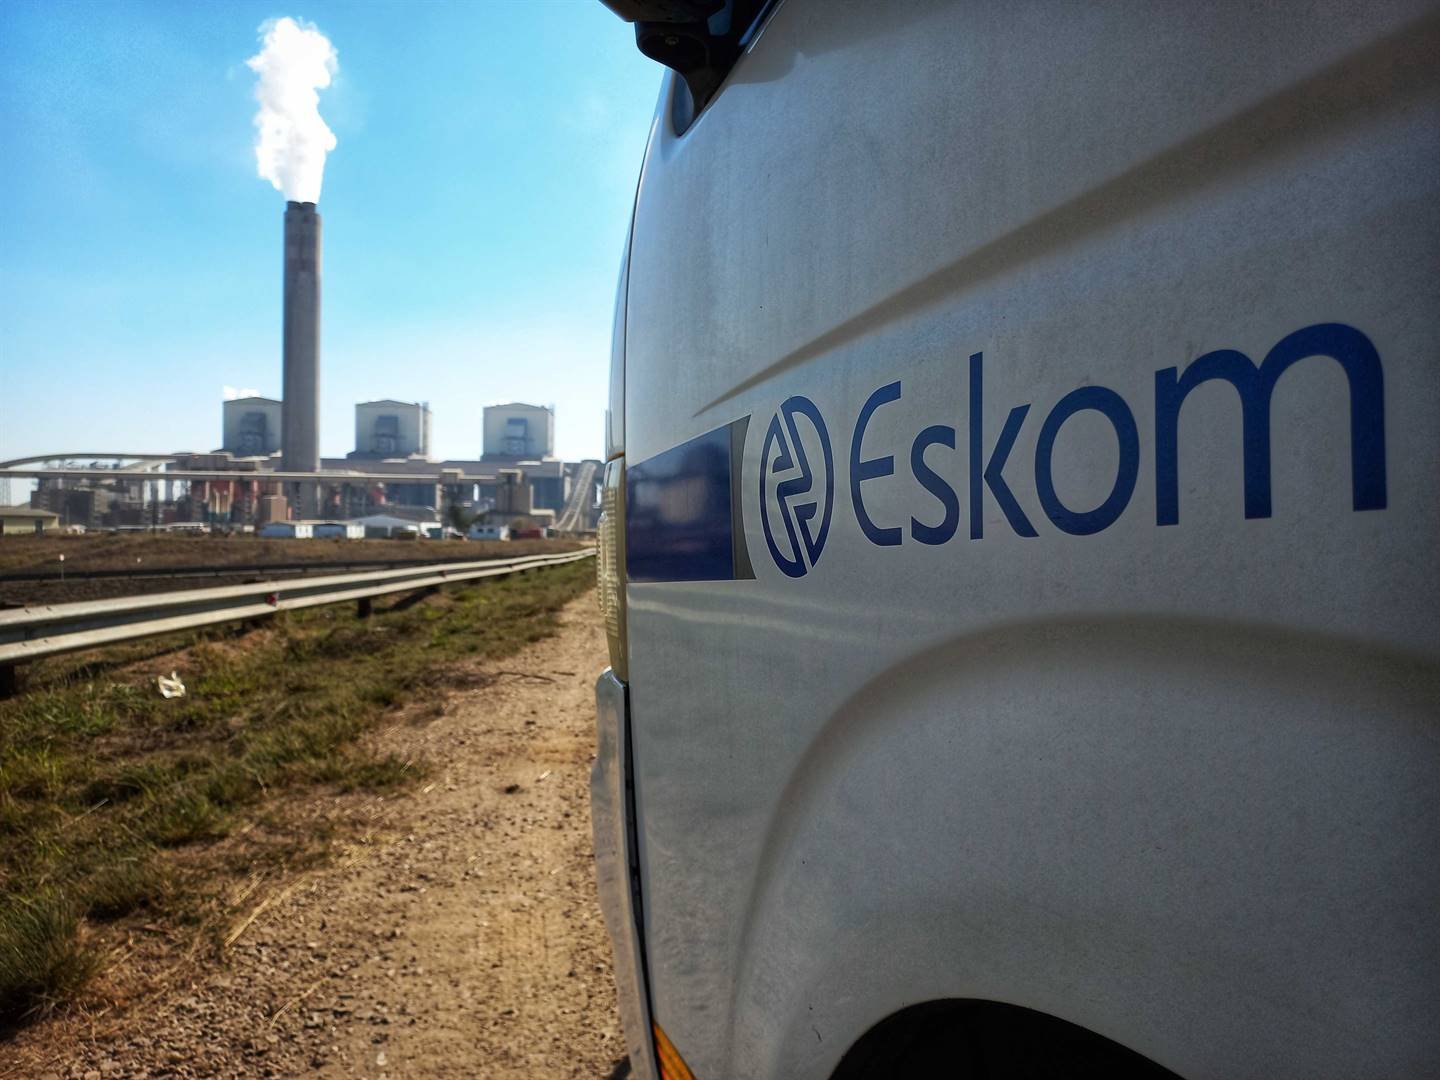 Electricity Minister Kgosientsho Ramokgopa said it was a ‘coincidence’ that Eskom has been able to supply uninterrupted power as the country approaches next month's elections.